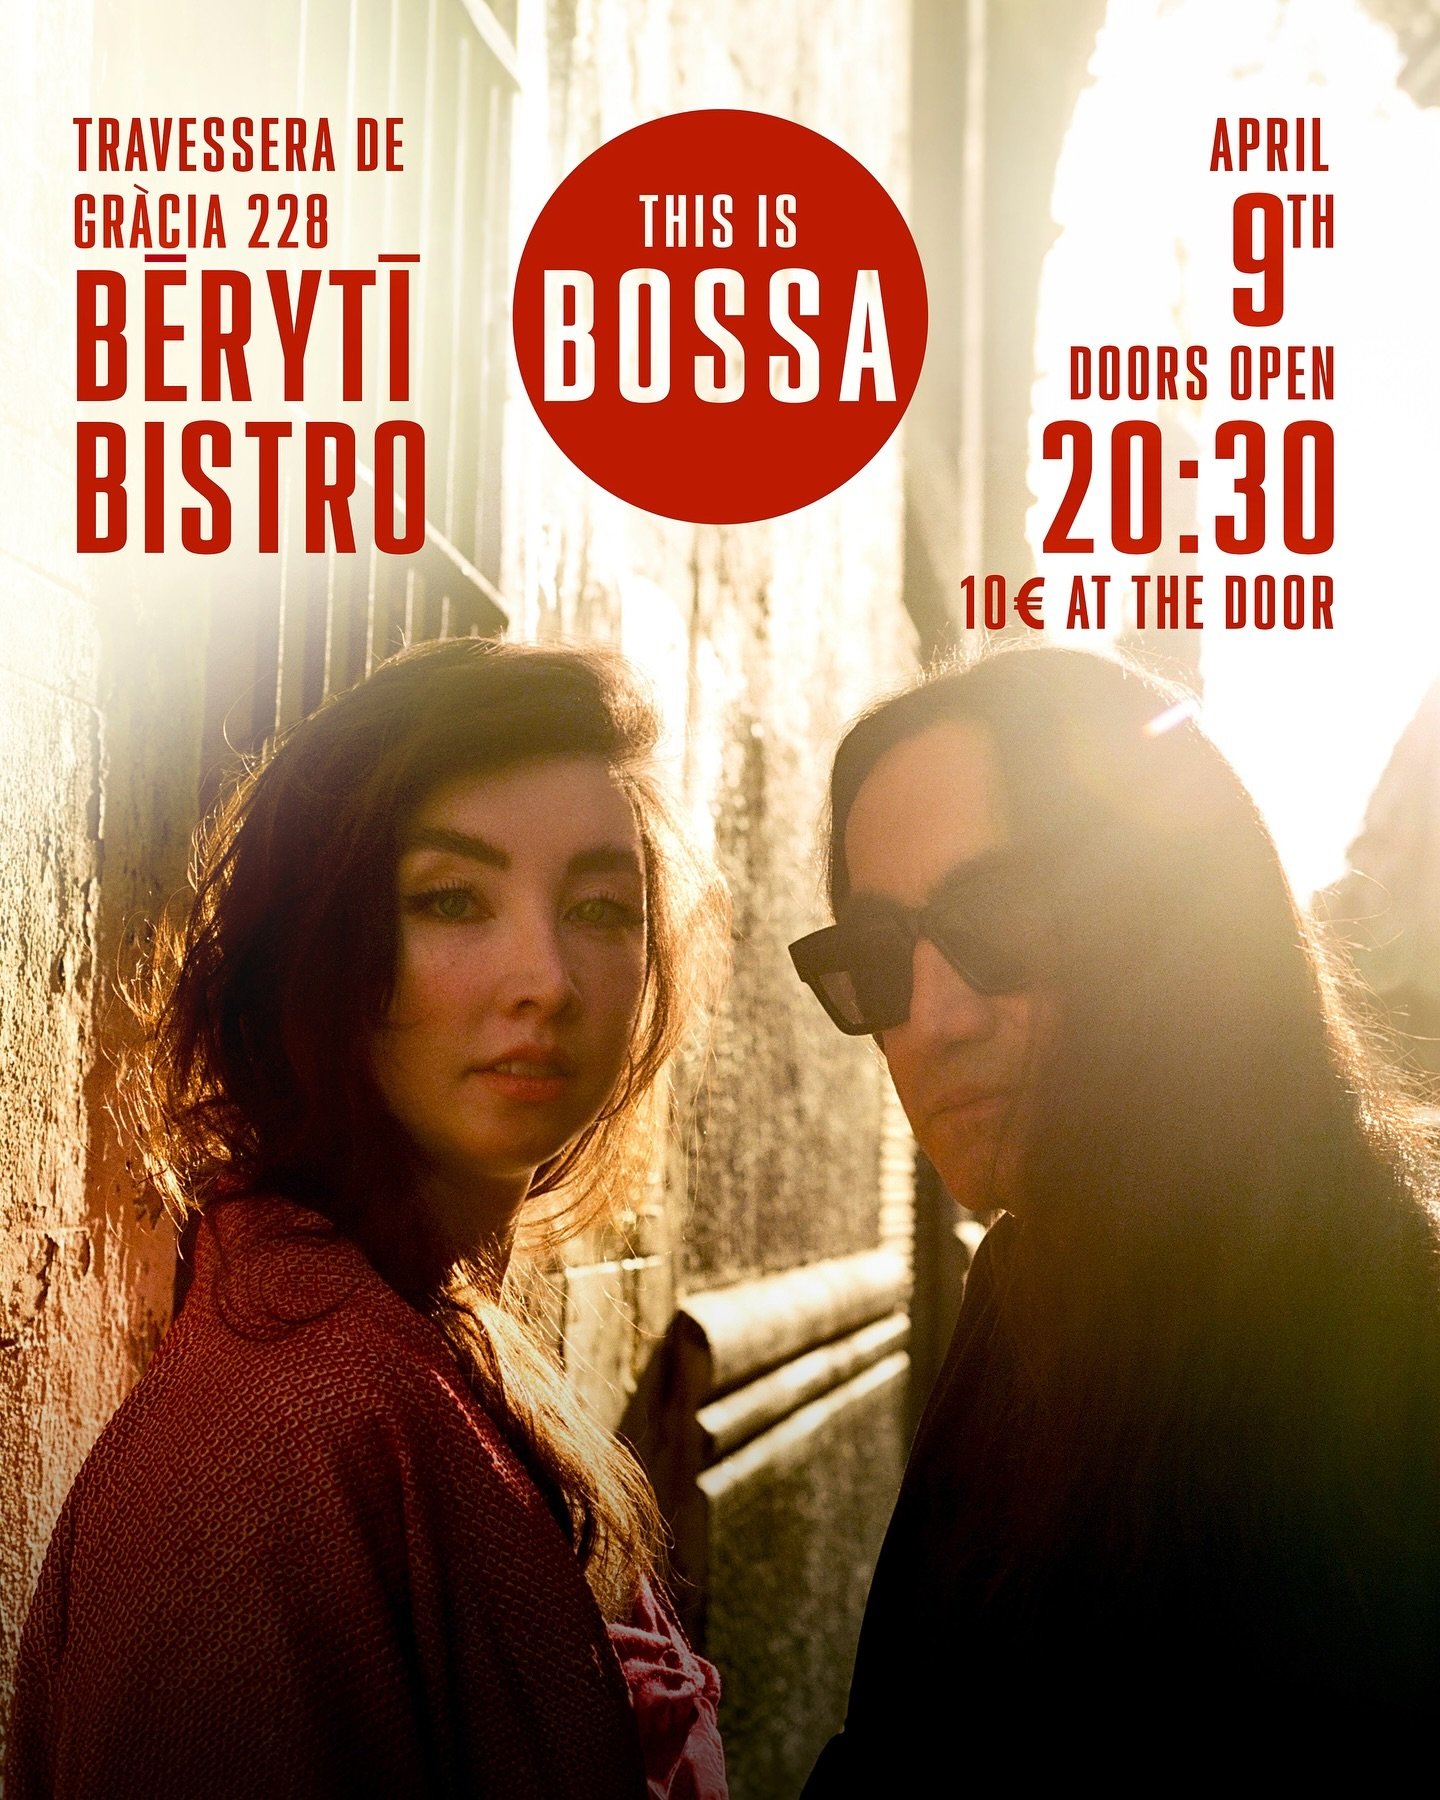 This coming Tuesday, we welcome spring with an intimate concert in a place we love, @berytibistro . We are waiting for you all from 20:30 to celebrate the most beautiful time of the year!

@digiorgiovioloes #yamahareface #rhodes #music #livemusic #mp